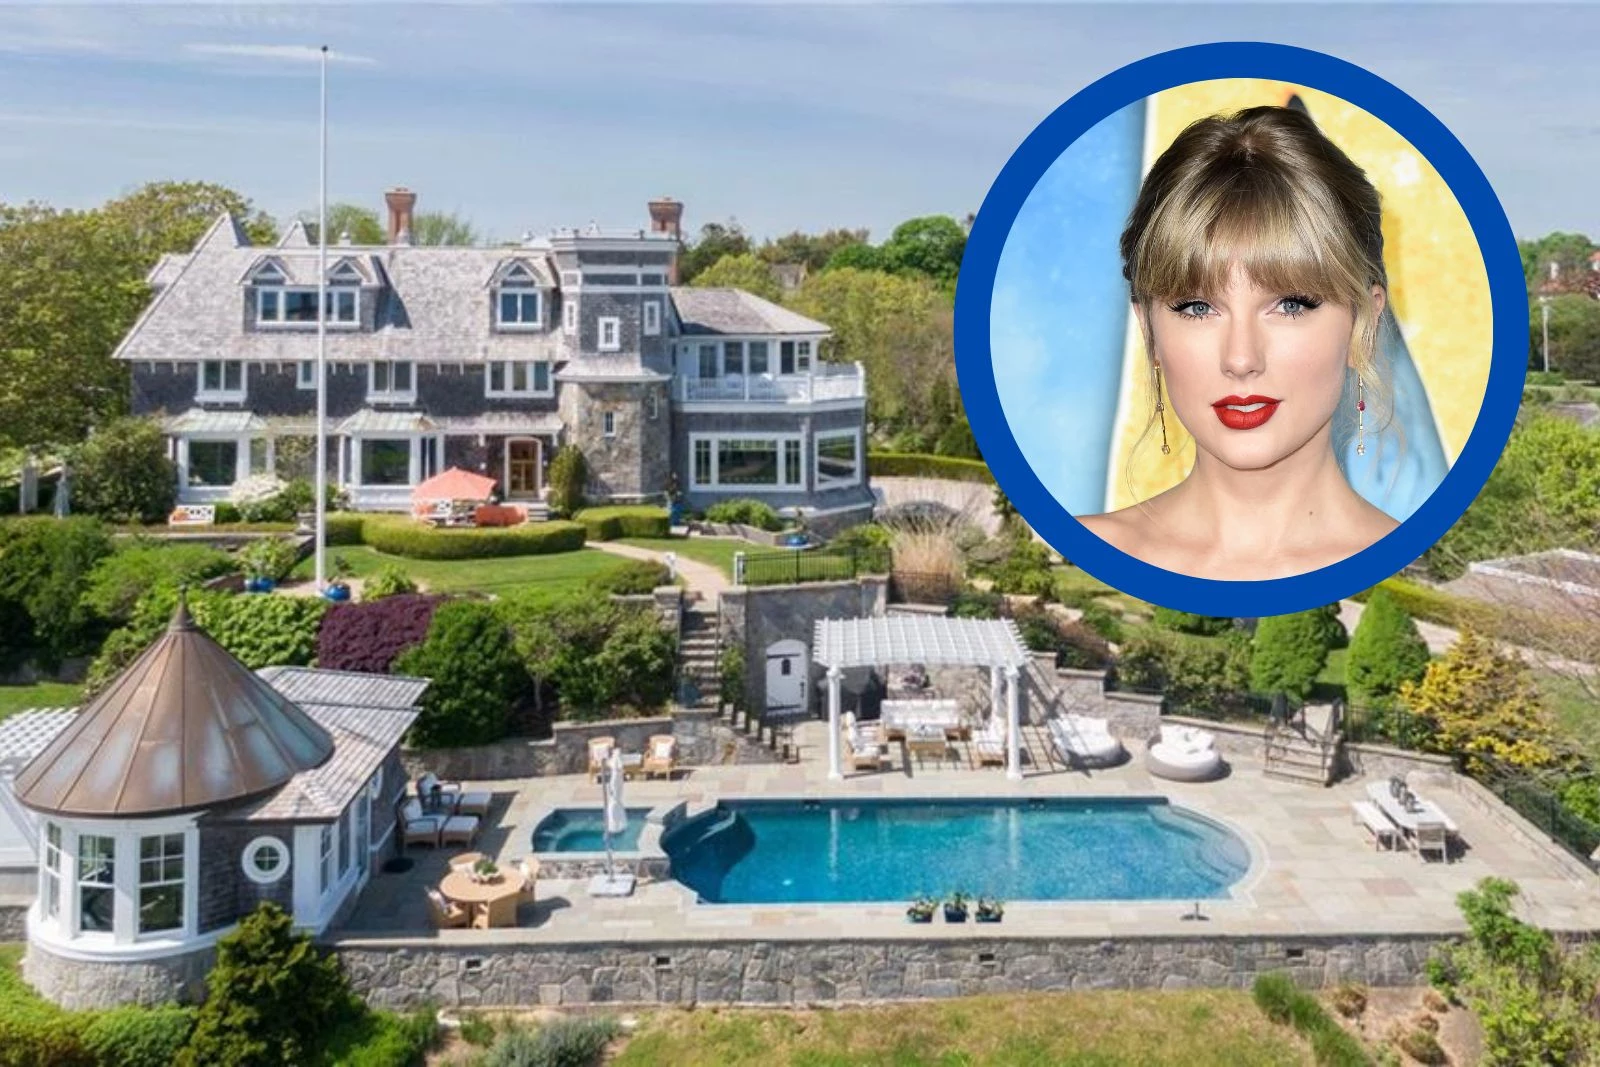 Live 3 Minutes From Taylor Swift in This New England Beach House